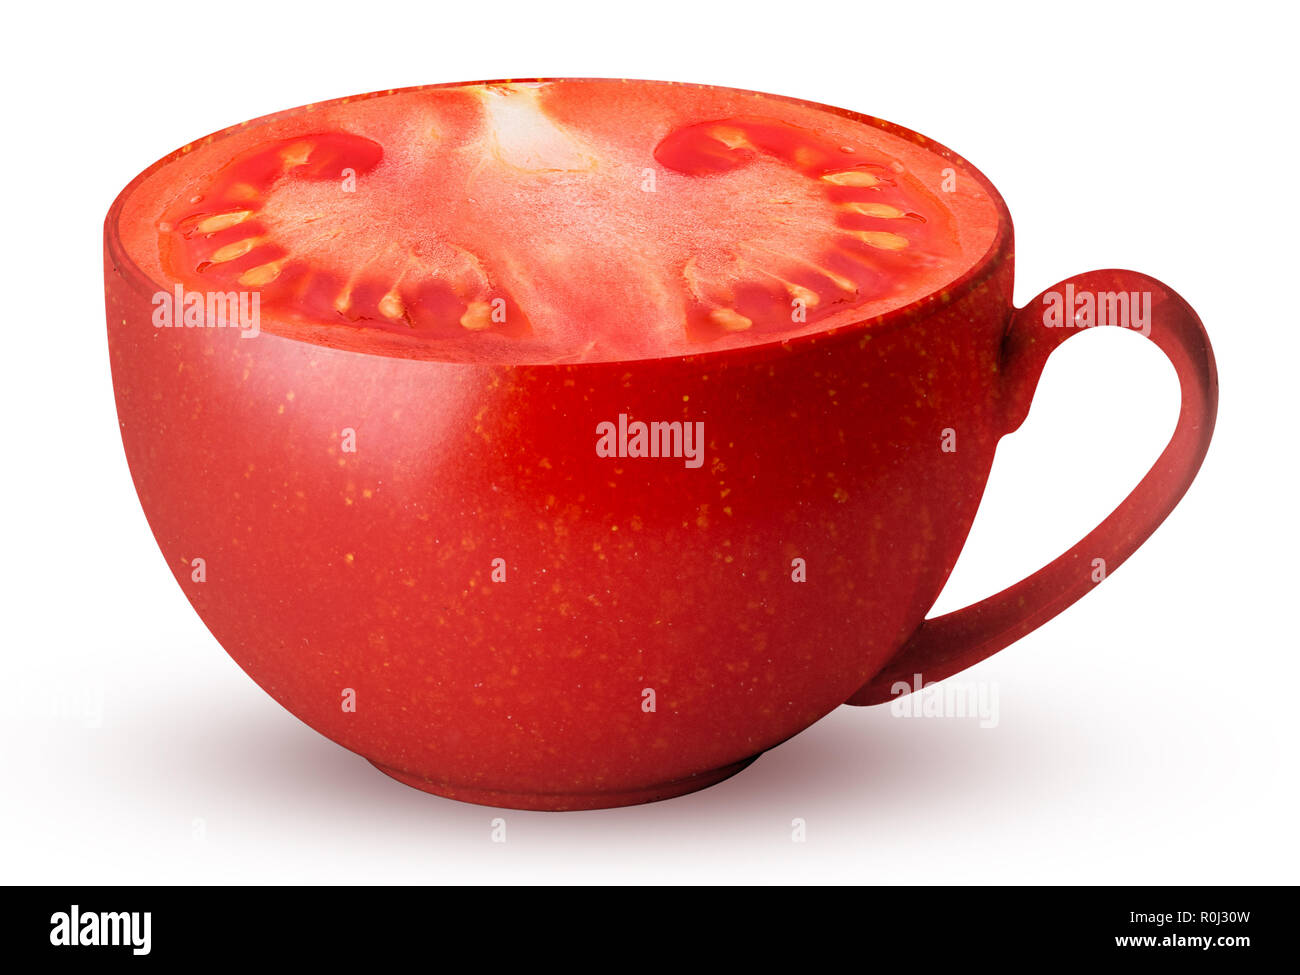 Mug of fresh red tomato isolated on white background Clipping Path. Full depth of field. Stock Photo